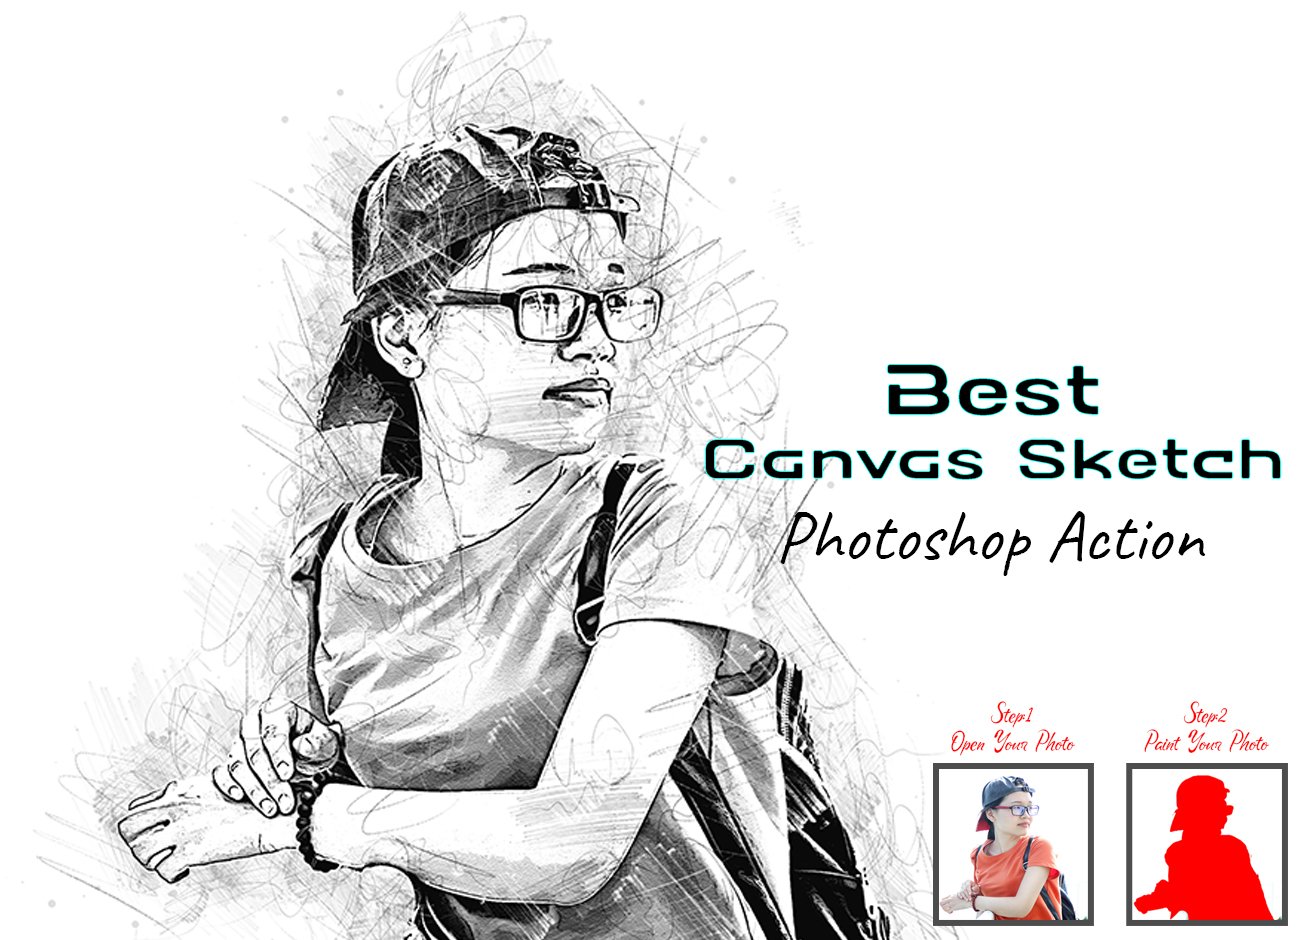 Best Canvas Sketch Photoshop Actioncover image.